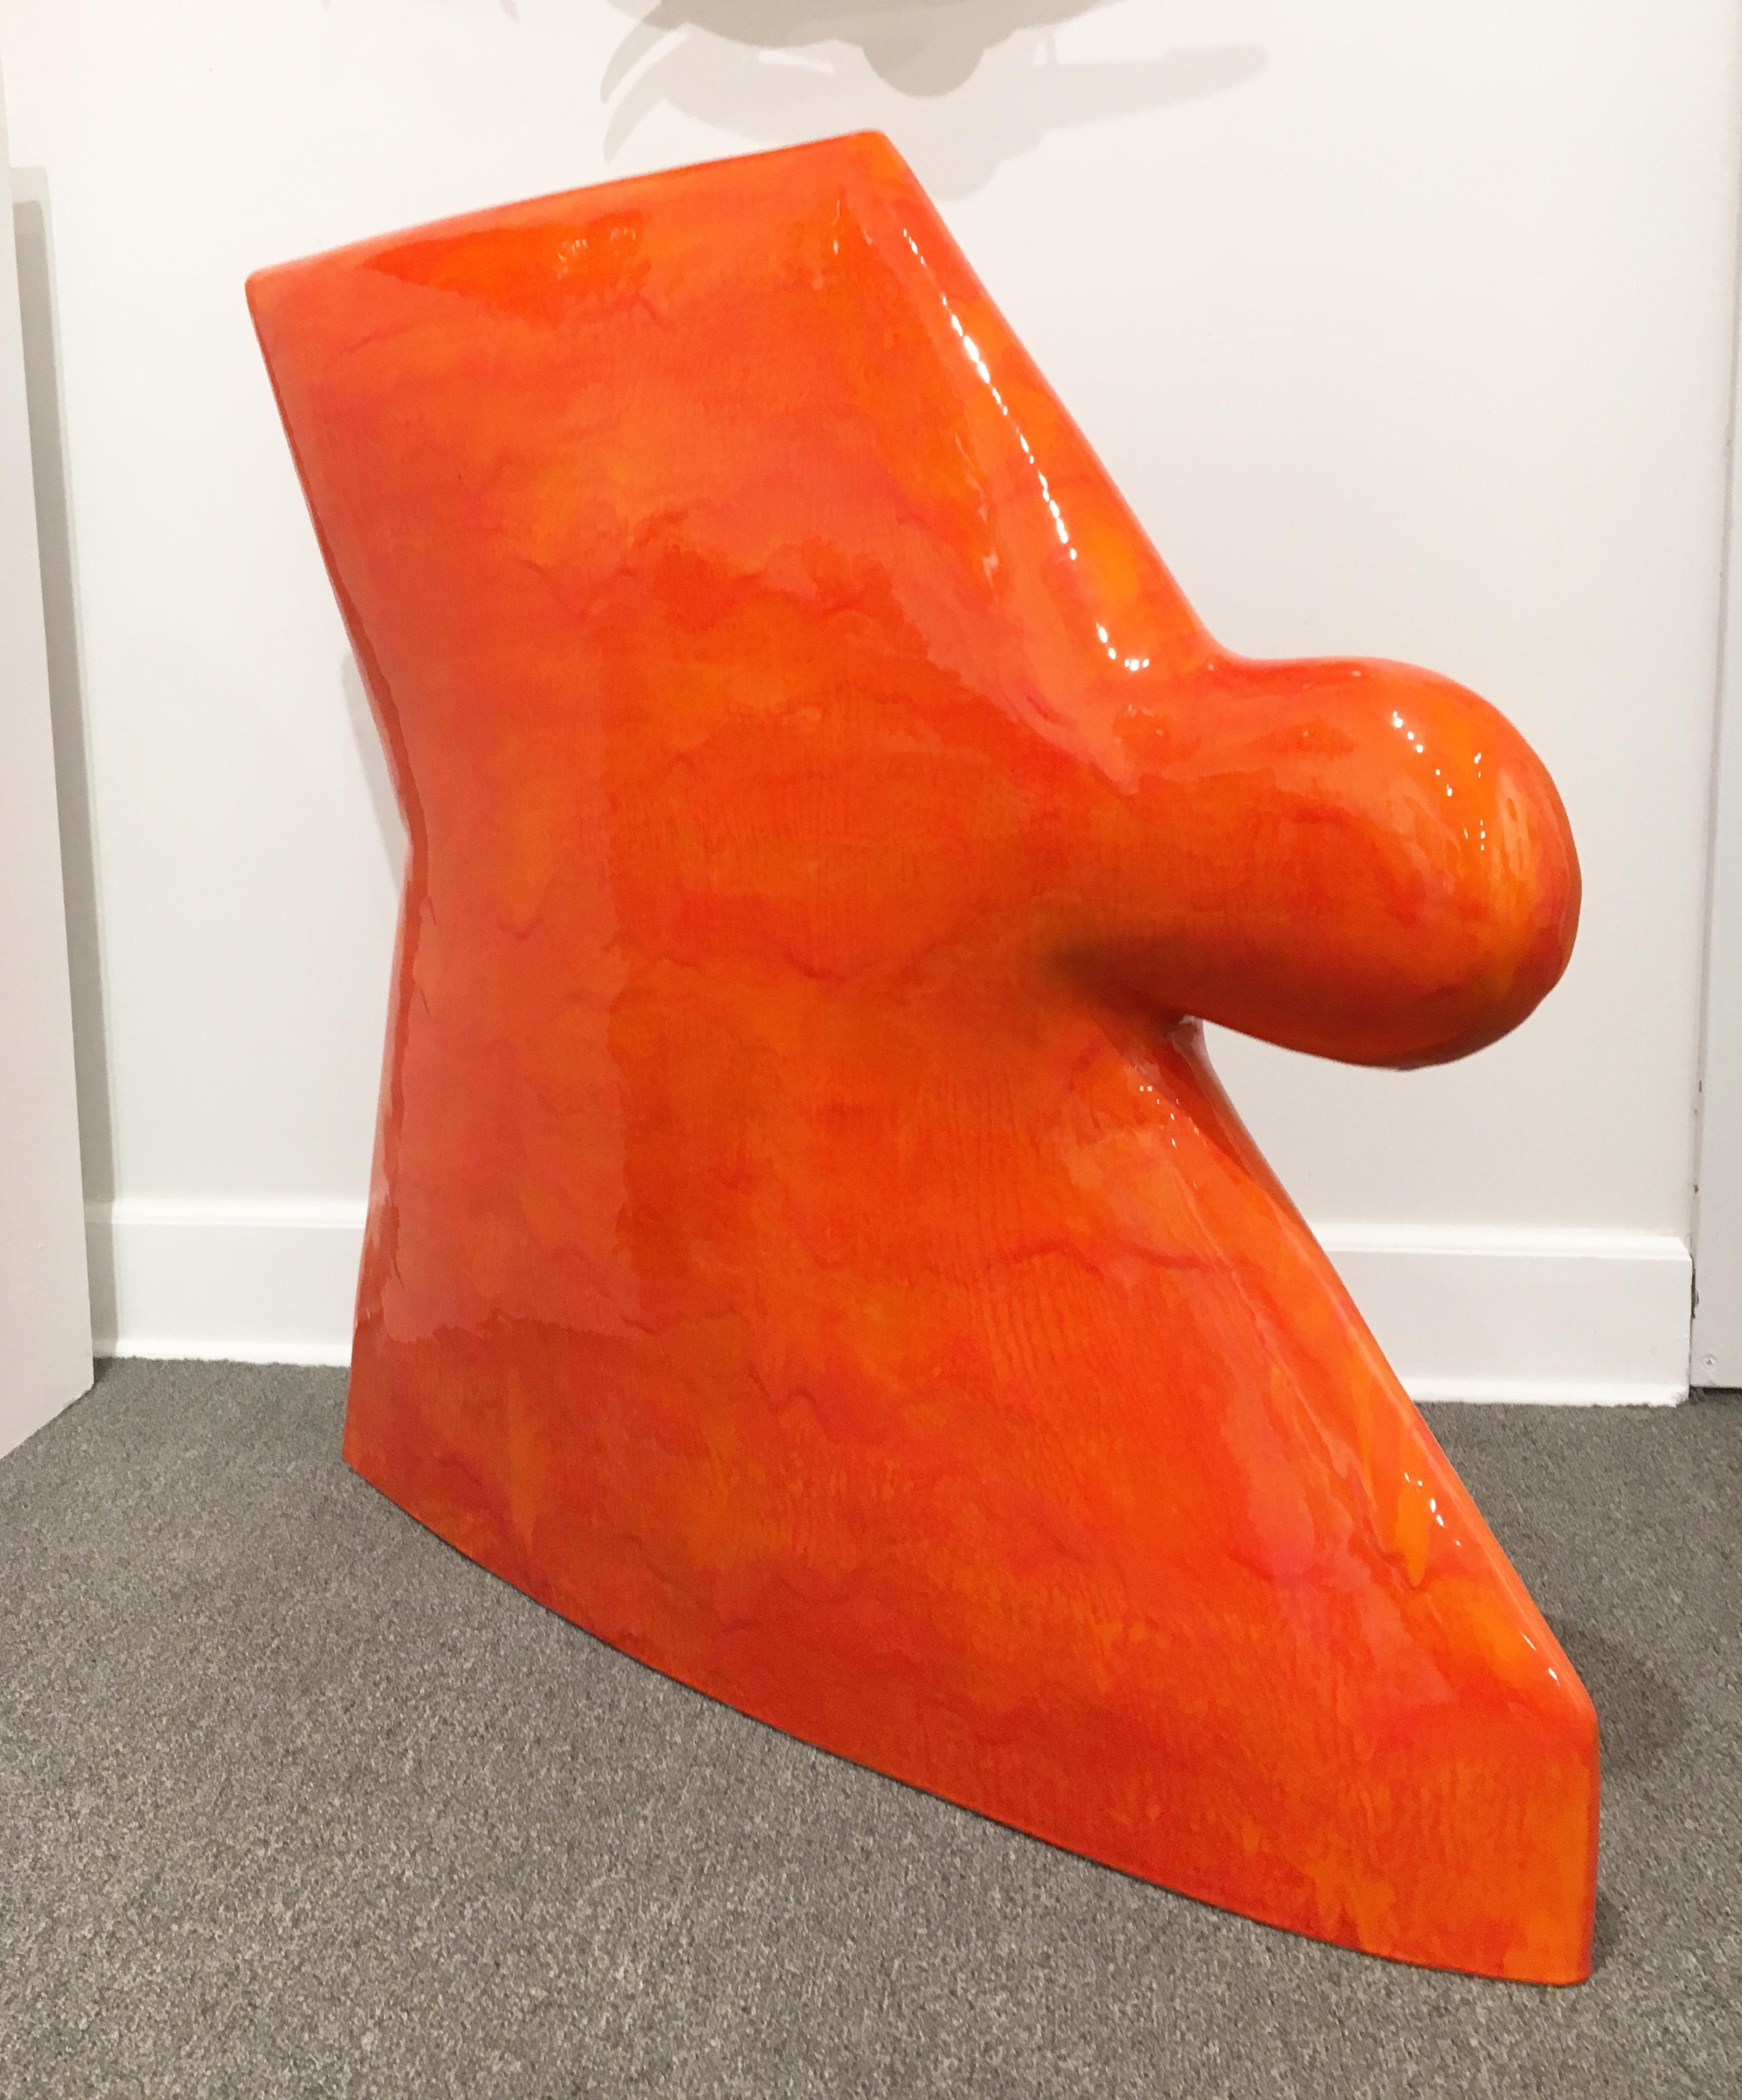 James Marshall Abstract Sculpture - Contemporary Minimalist Ceramic Sculpture with Vibrant Orange Glaze, Abstract